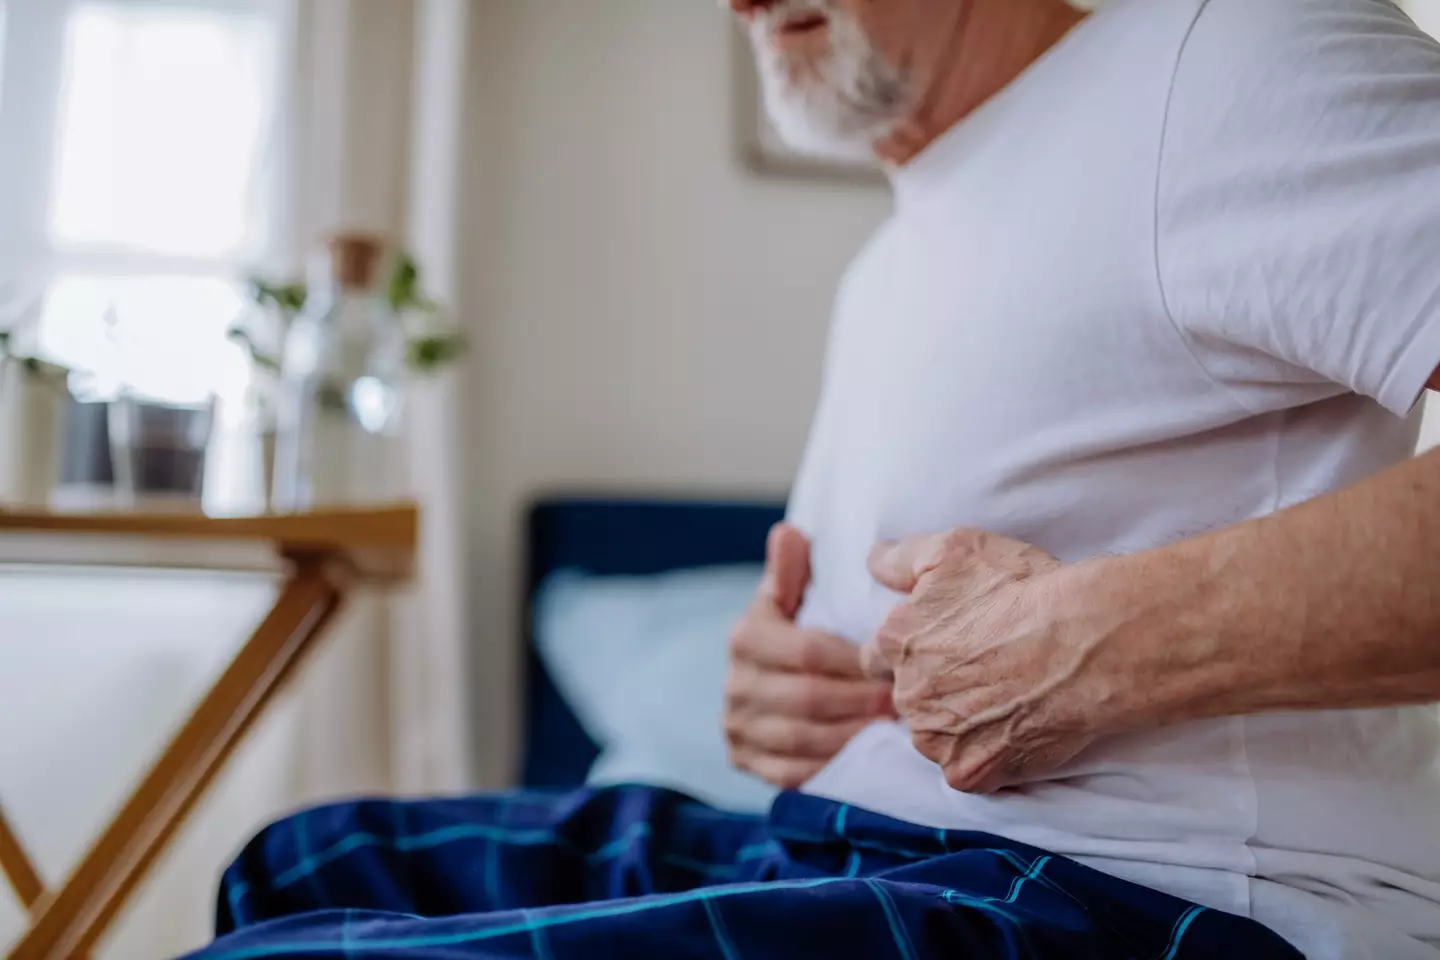 Stomach pain can relate to a wide range of issues, such as IBS, kideny stones or appendicitis.